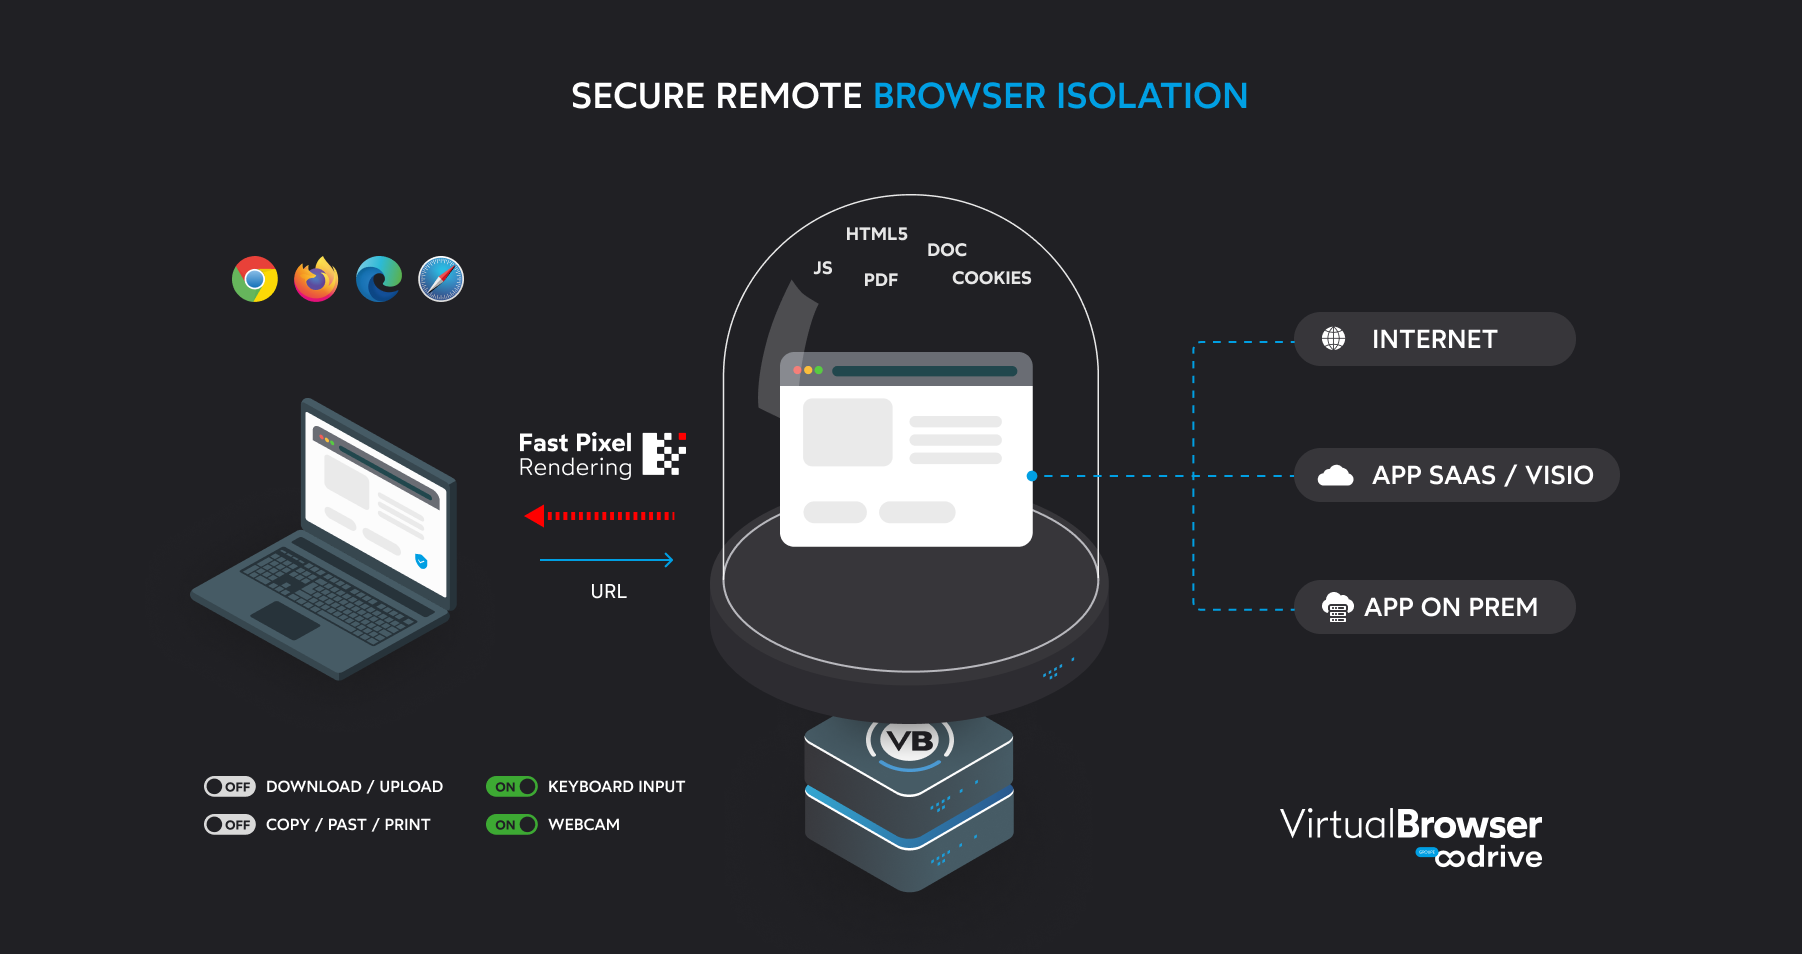 Virtualbrowser remote browser isolation